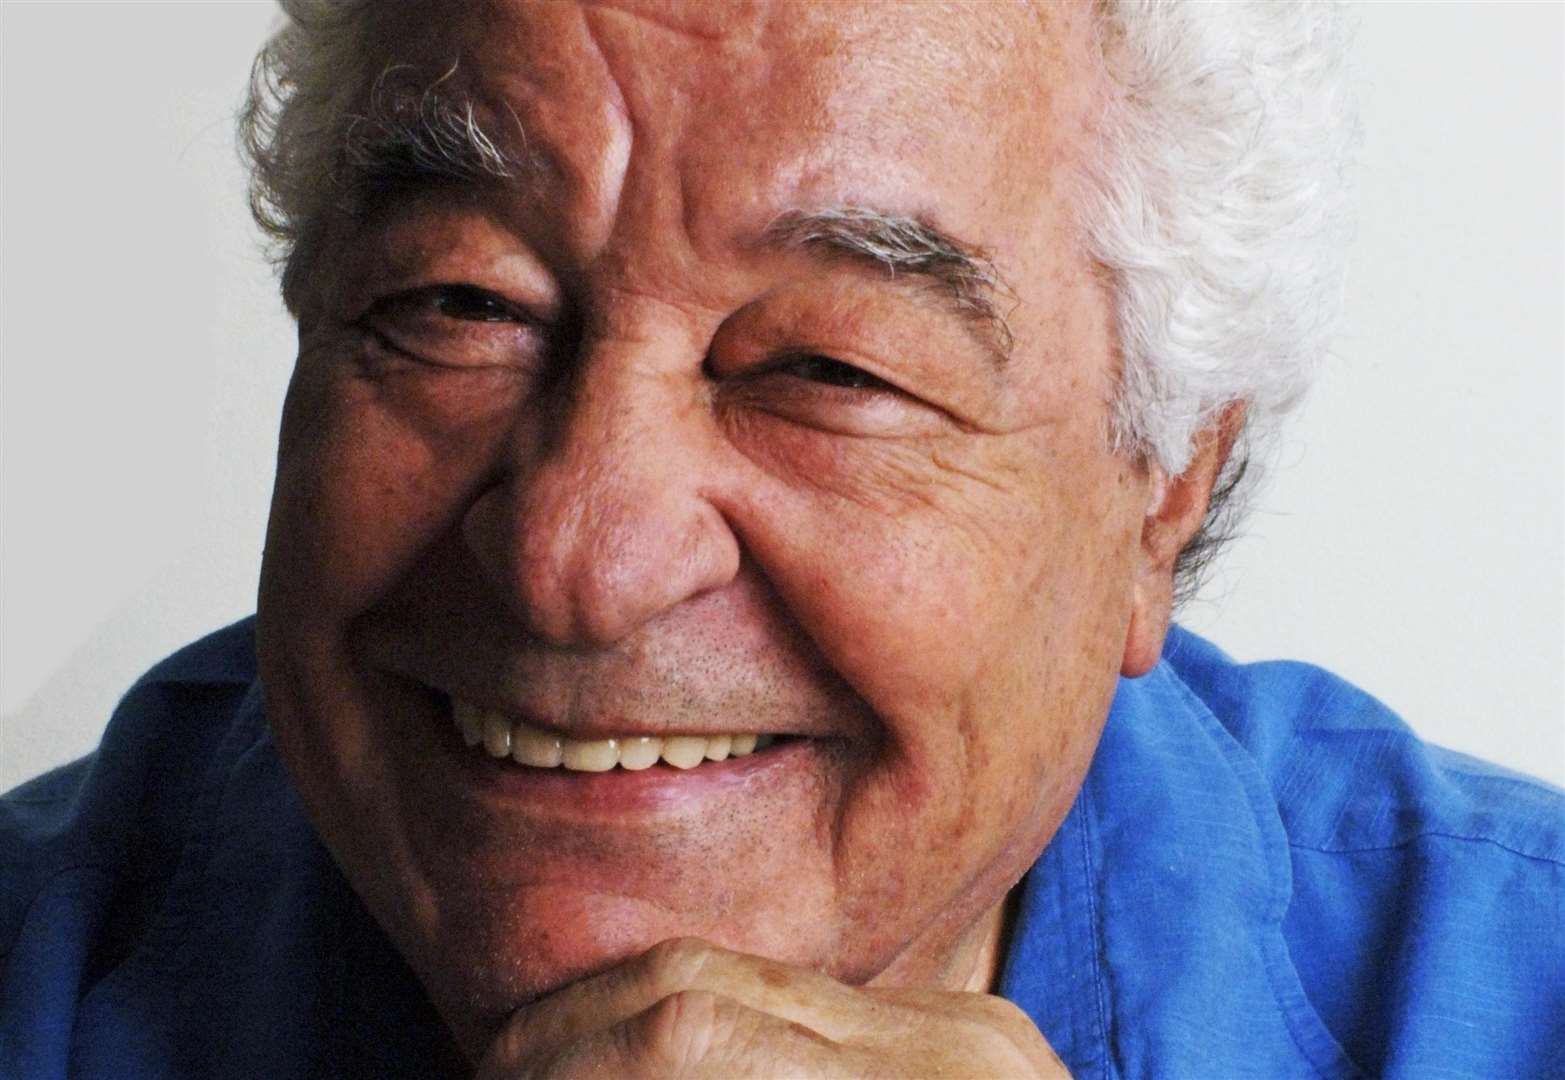 Restaurant's founder Antonio Carluccio, who died last year, sold his stake in the firm in 2005